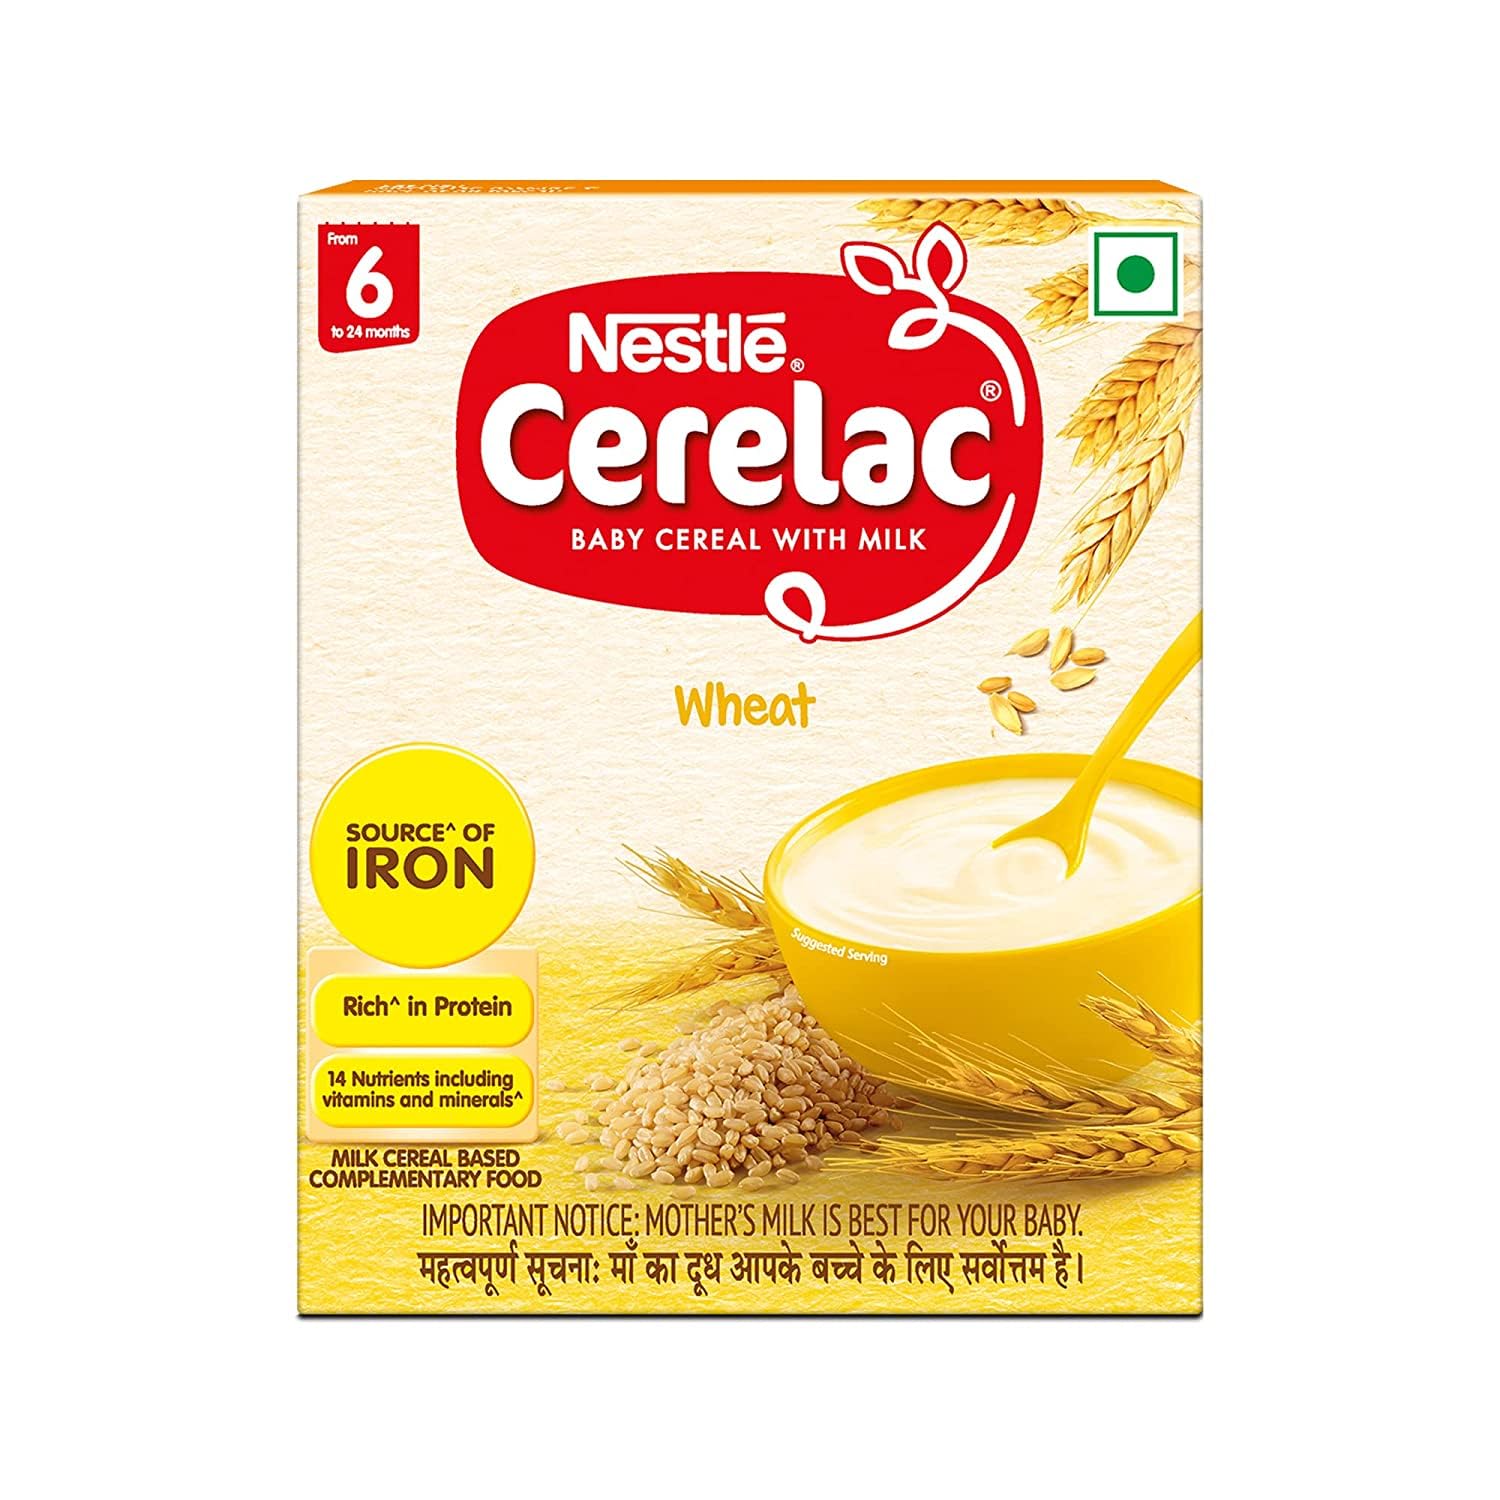 Nestle Cerelac Baby Cereal with Milk & Iron (from 6 to 24 Months) | Wheat